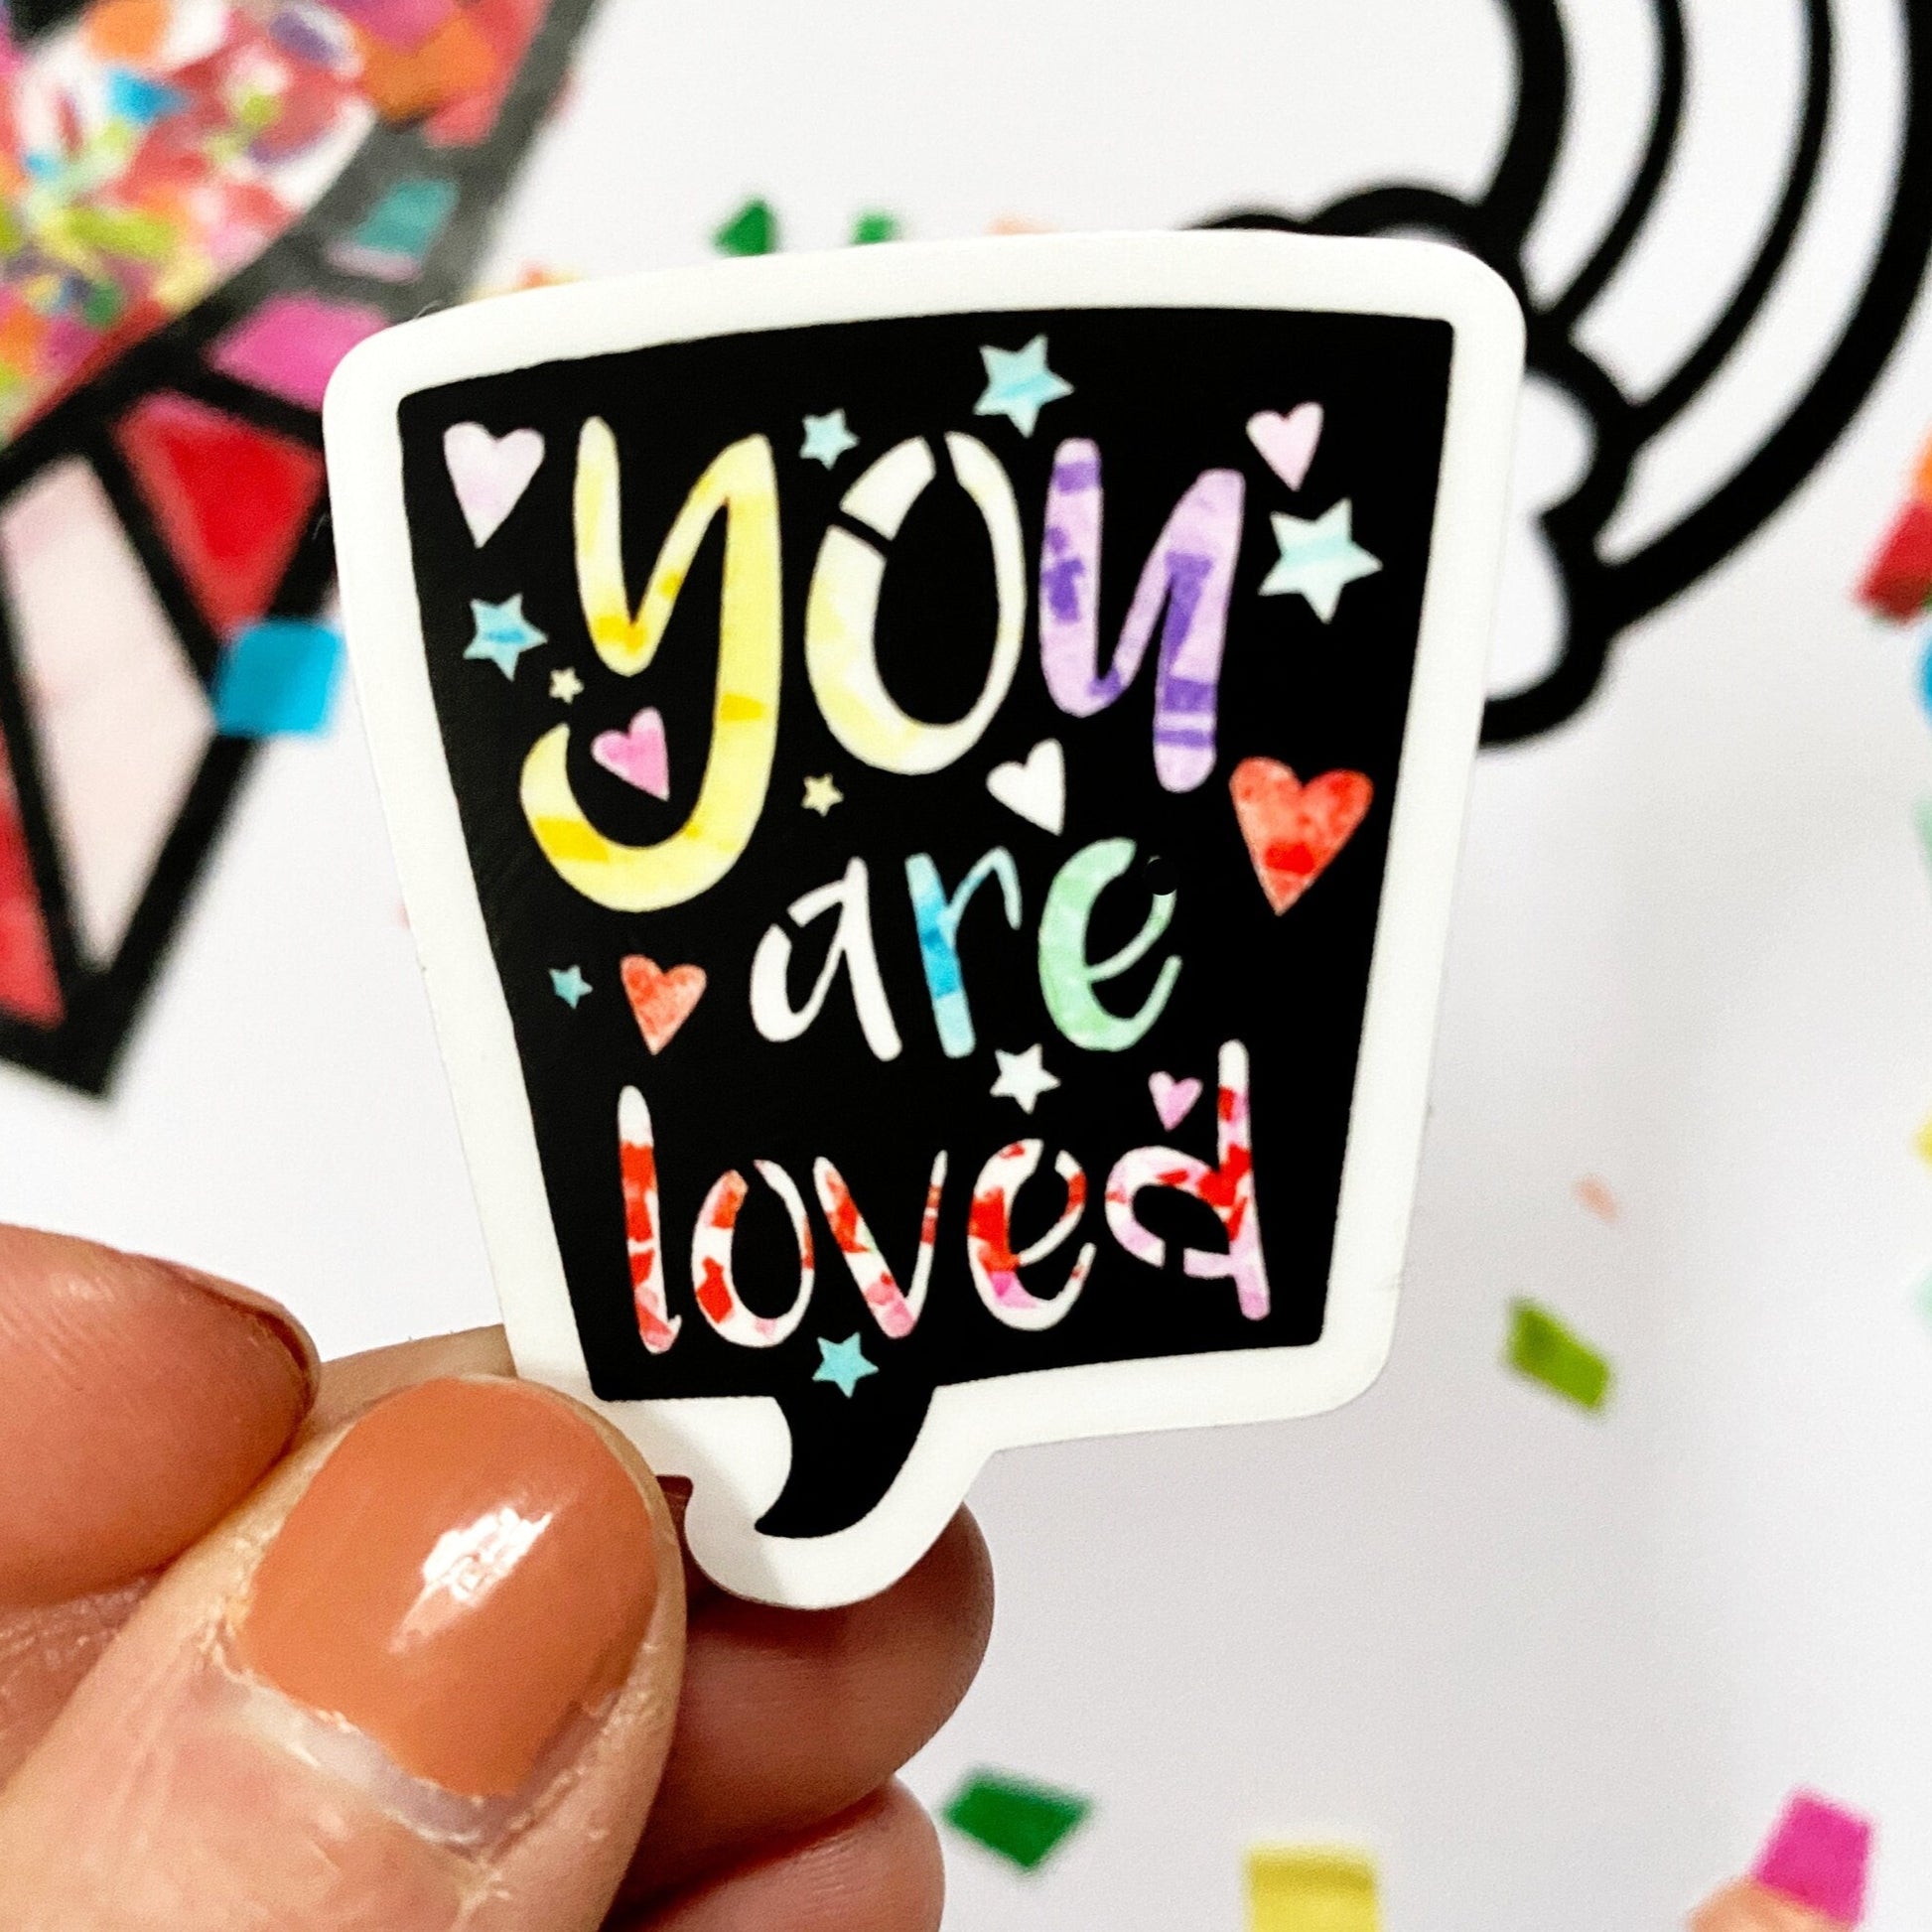 You are loved vinyl sticker for kids